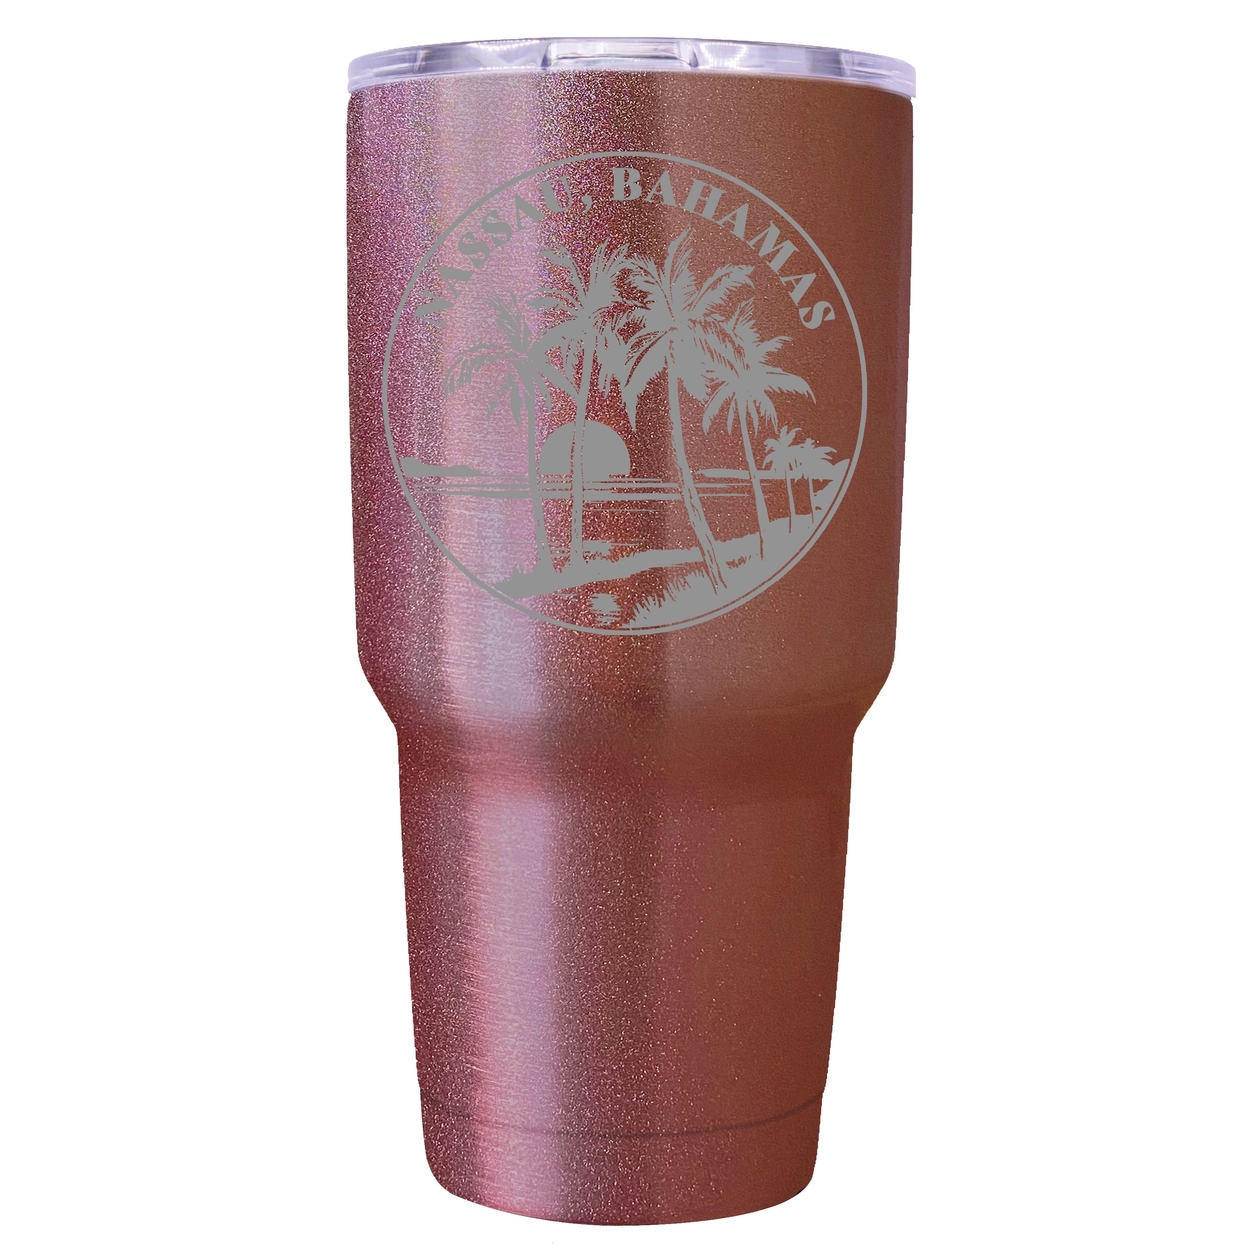 Nassau The Bahamas Souvenir 24 Oz Engraved Insulated Stainless Steel Tumbler - White,,4-Pack